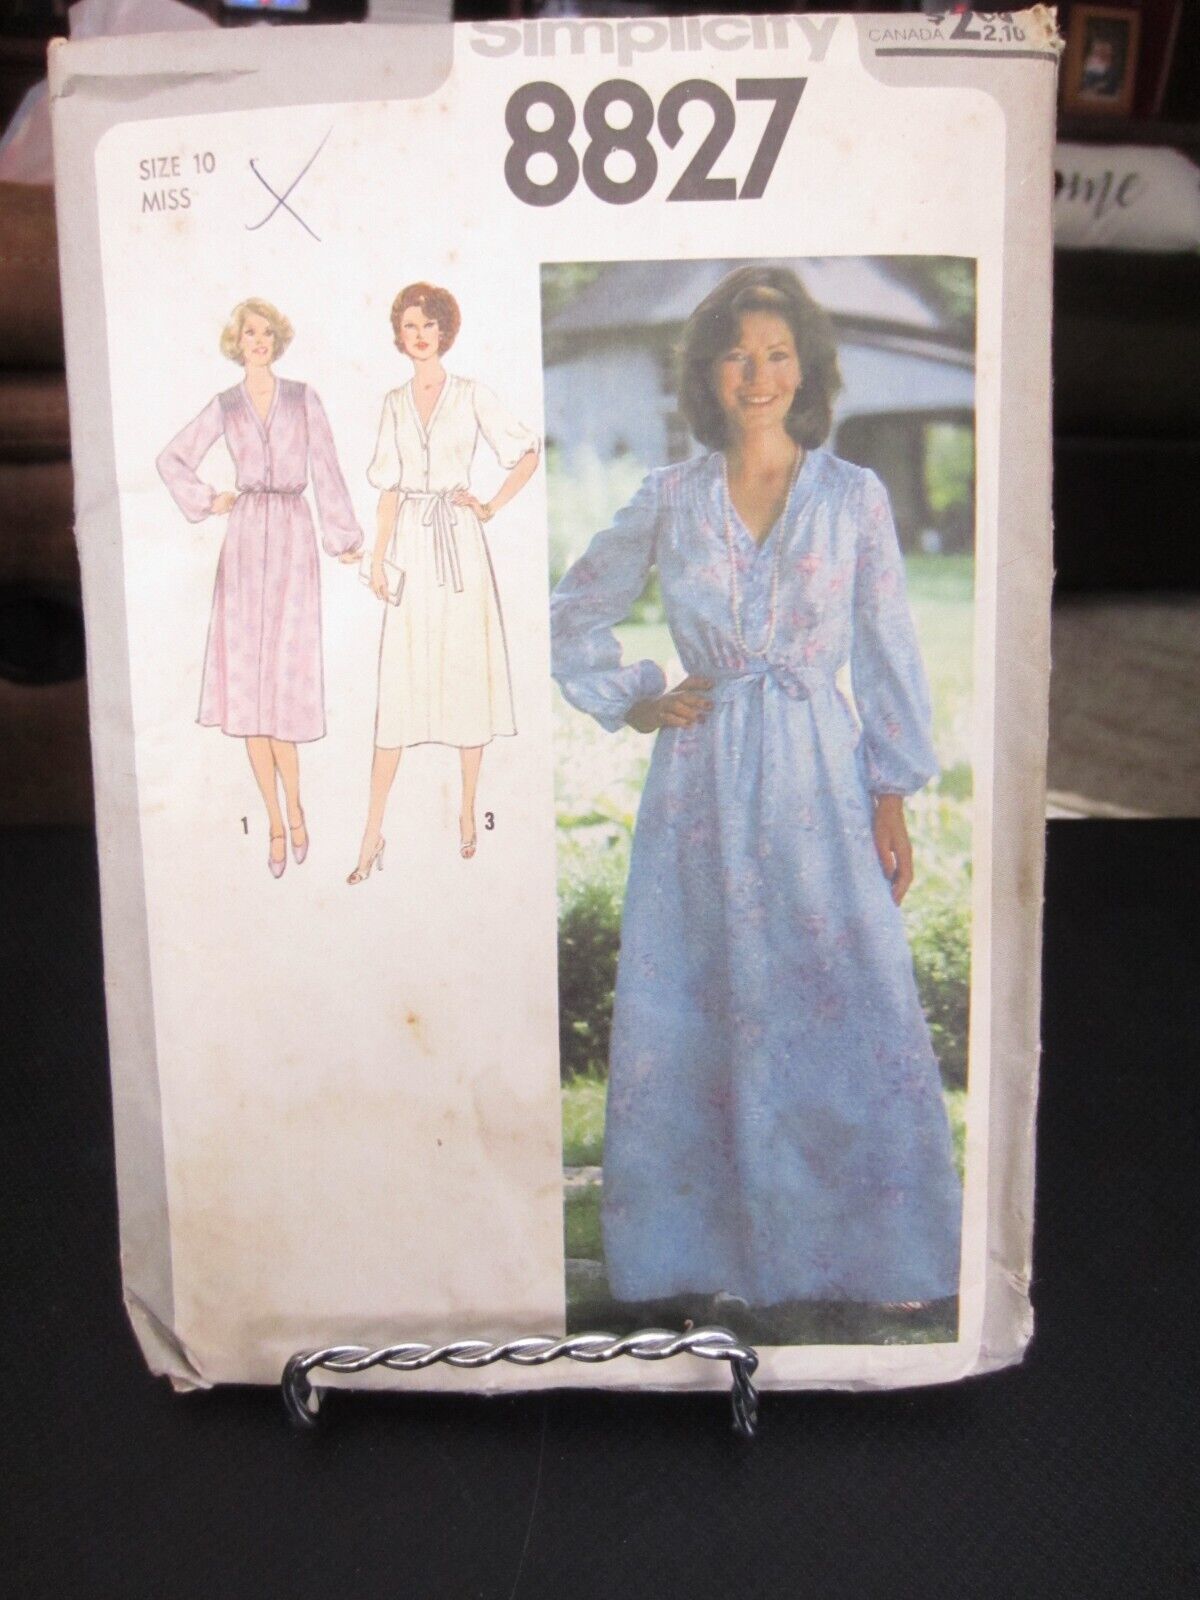 Primary image for Simplicity 8827 Misses Dress in 2 Lengths & Tie Belt Pattern - Size 10 Bust 32.5